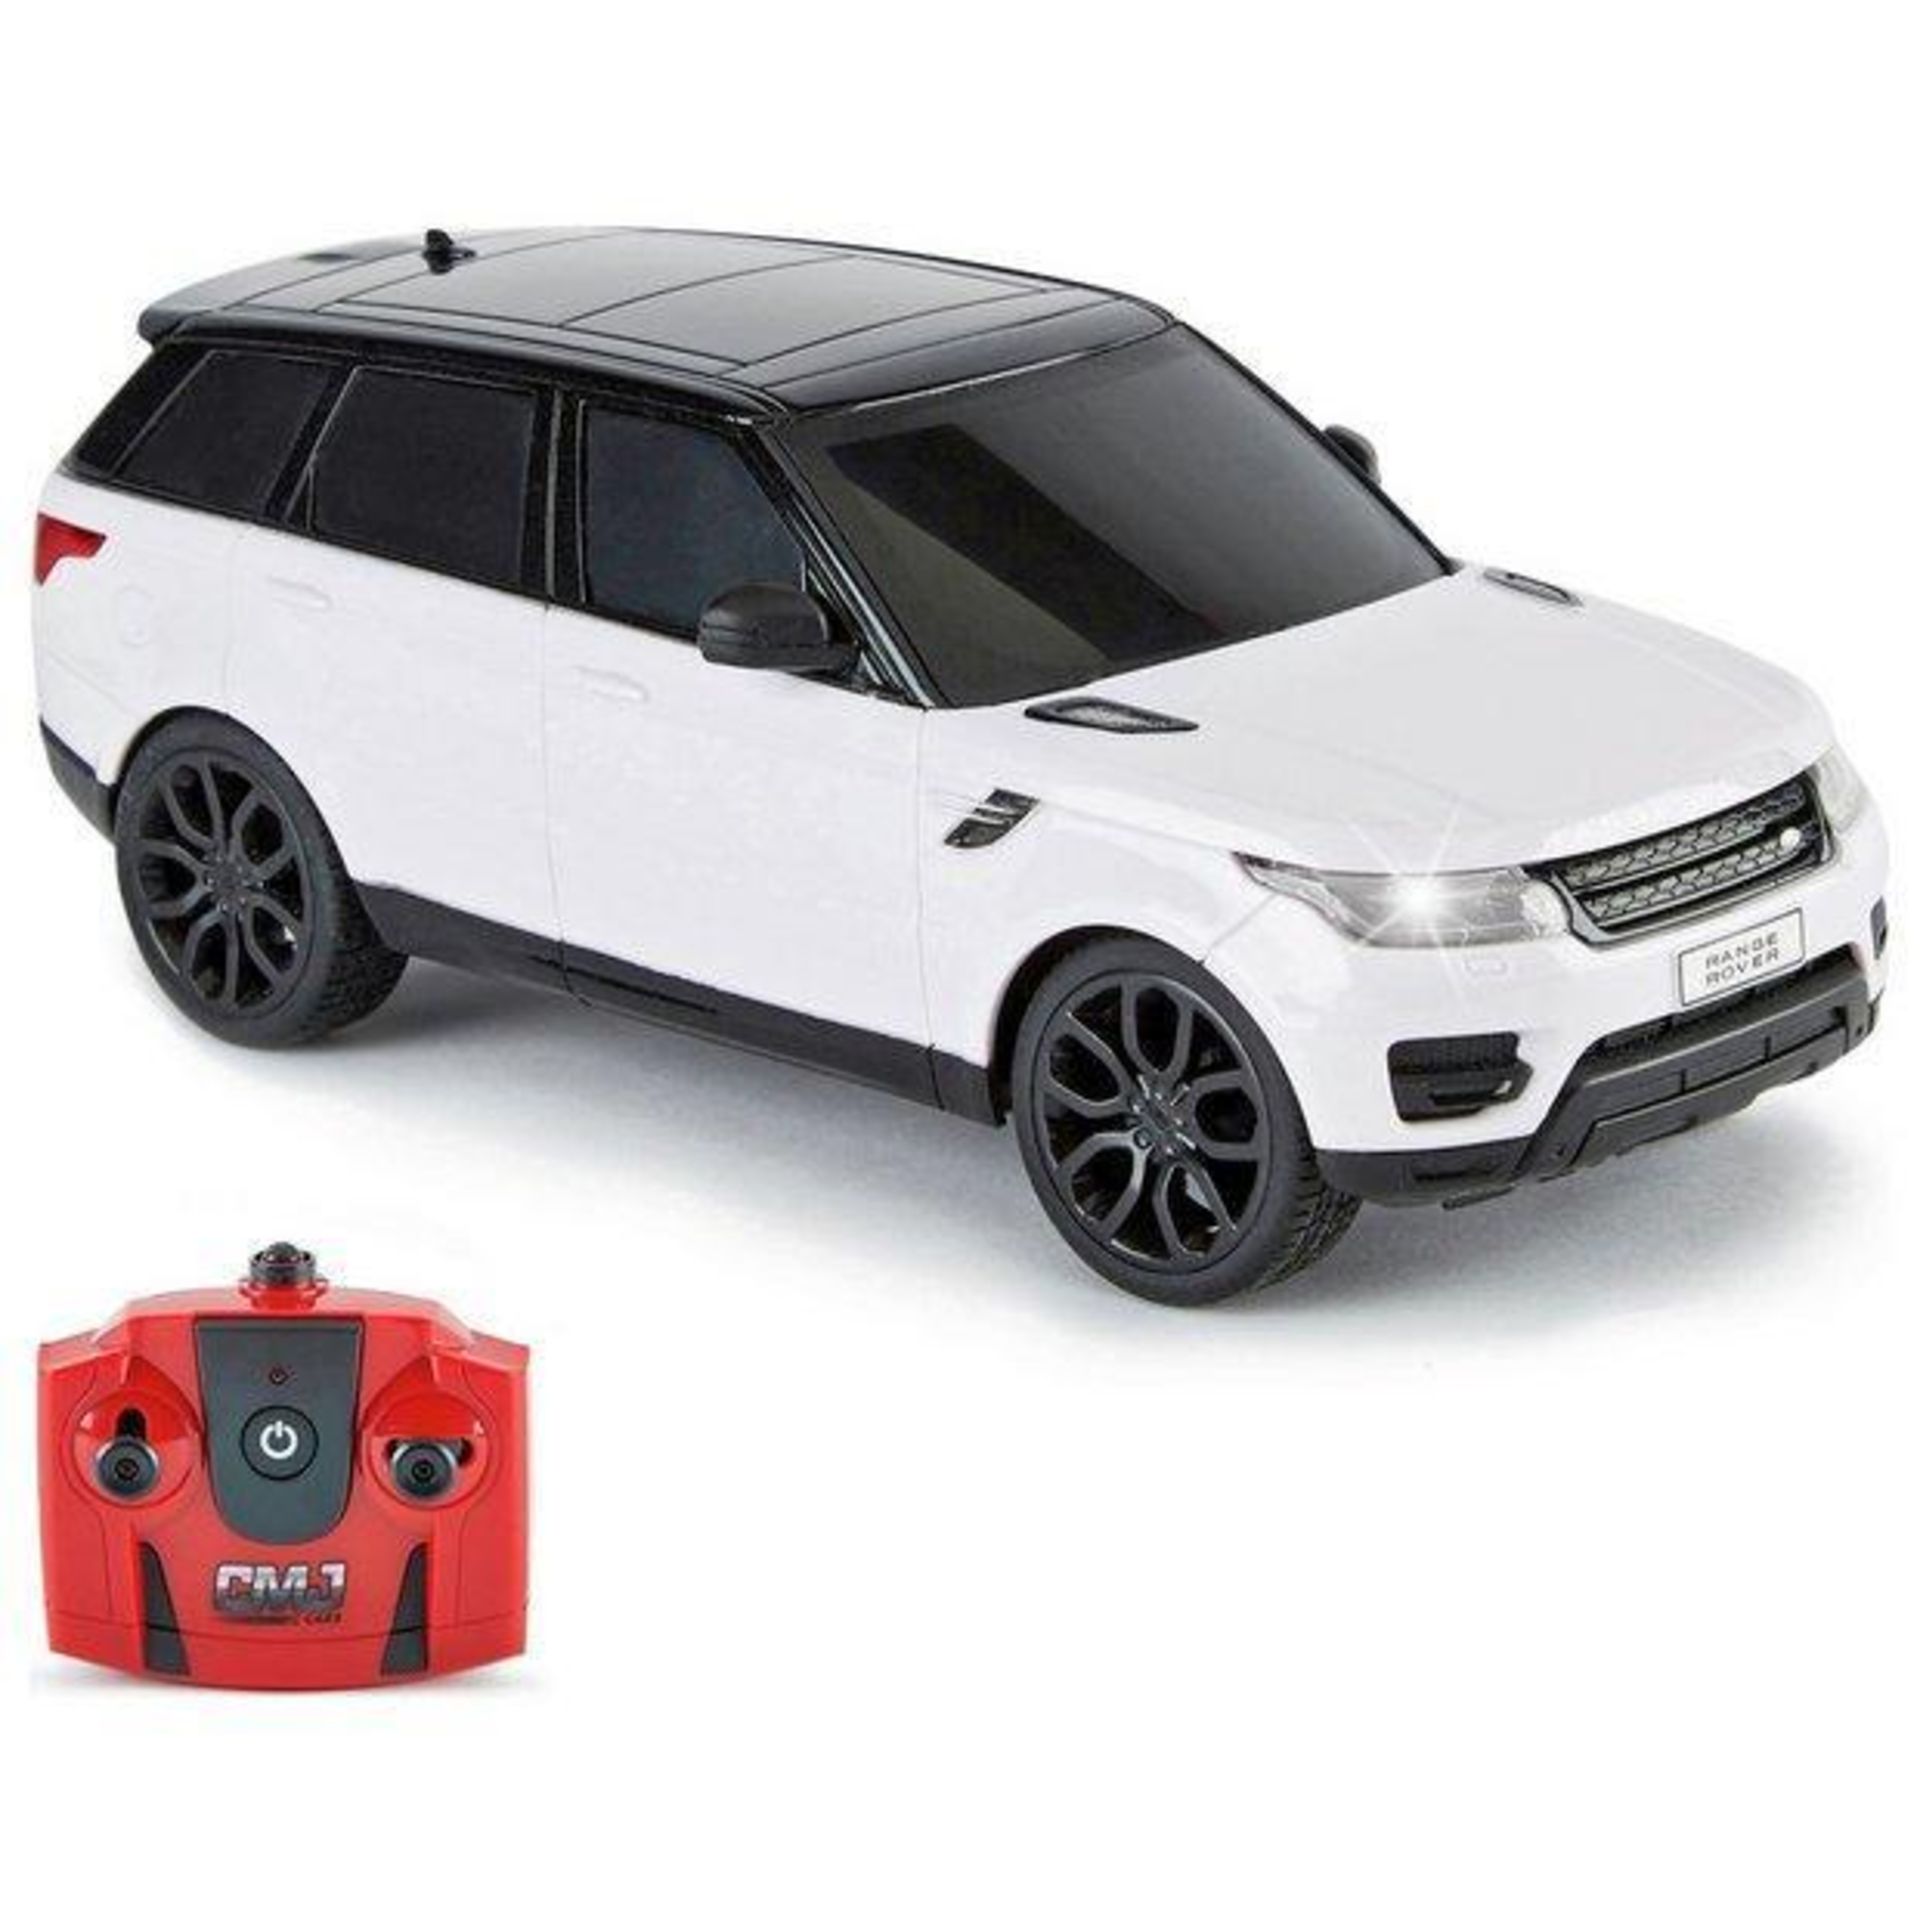 Radio Controlled Range Rover 1:24 Scale - White 2.4GHZ - £11.00 RRP